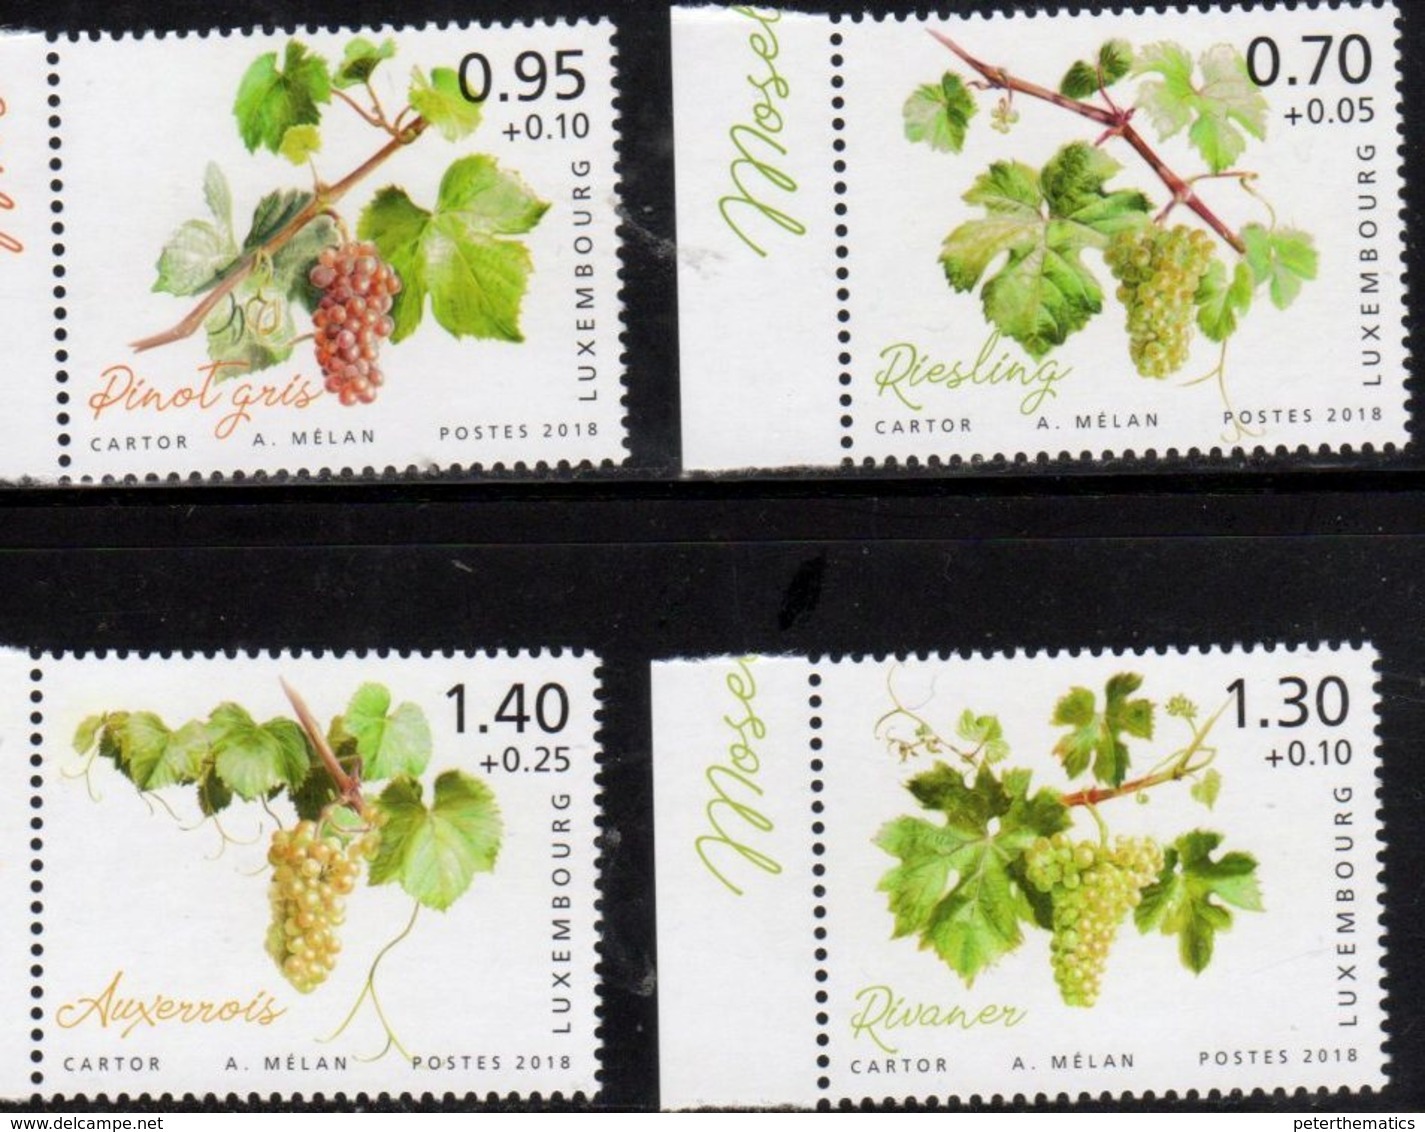 LUXEMBOURG, 2018, MNH, CHARITY STAMPS, MOSELLE REGION, GRAPES, VINES, 4v - Fruits